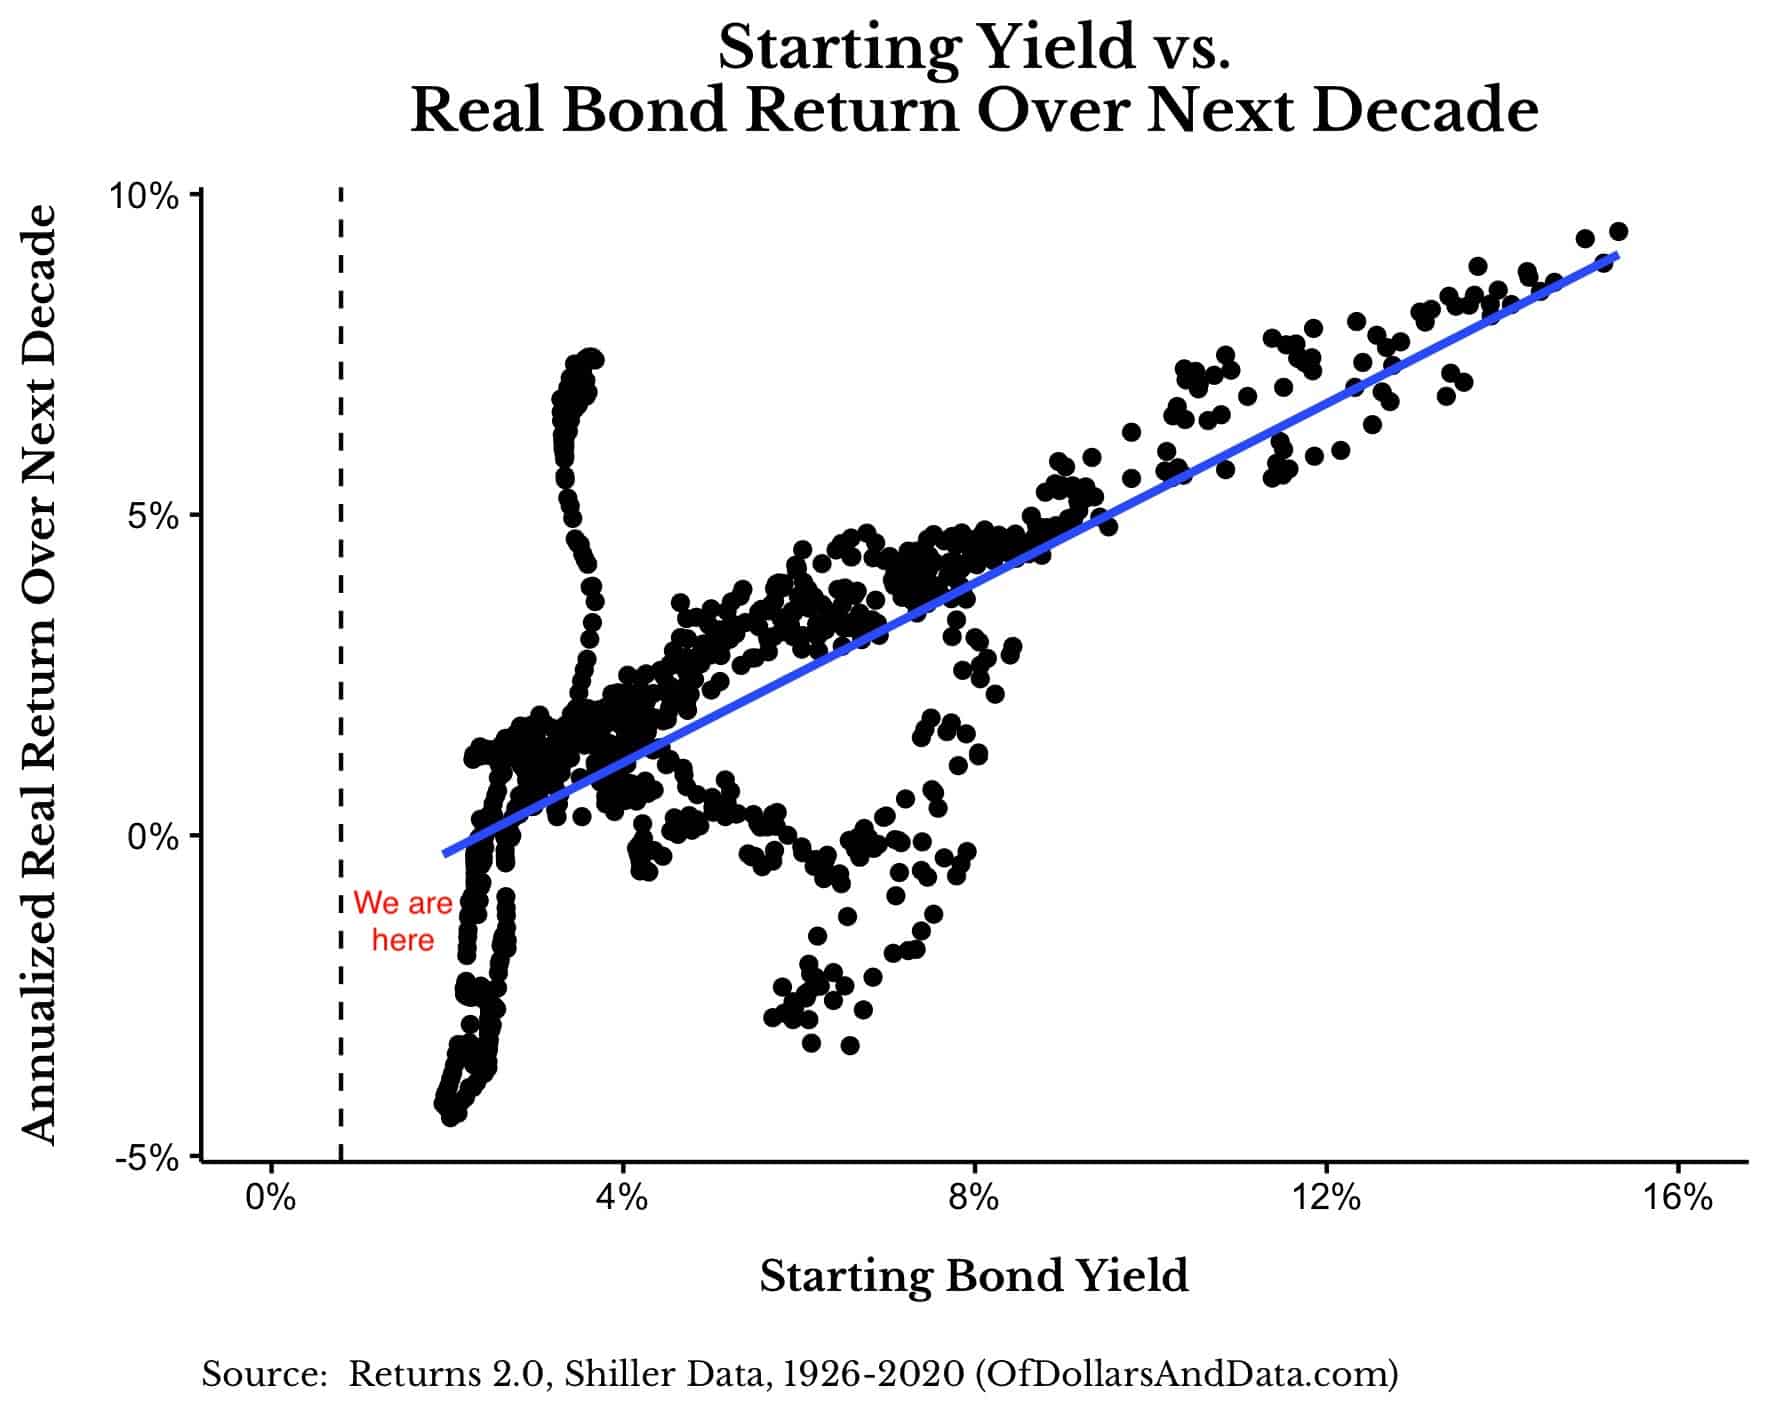 Starting yield vs real bond return over the next decade plus where yields are in 2020